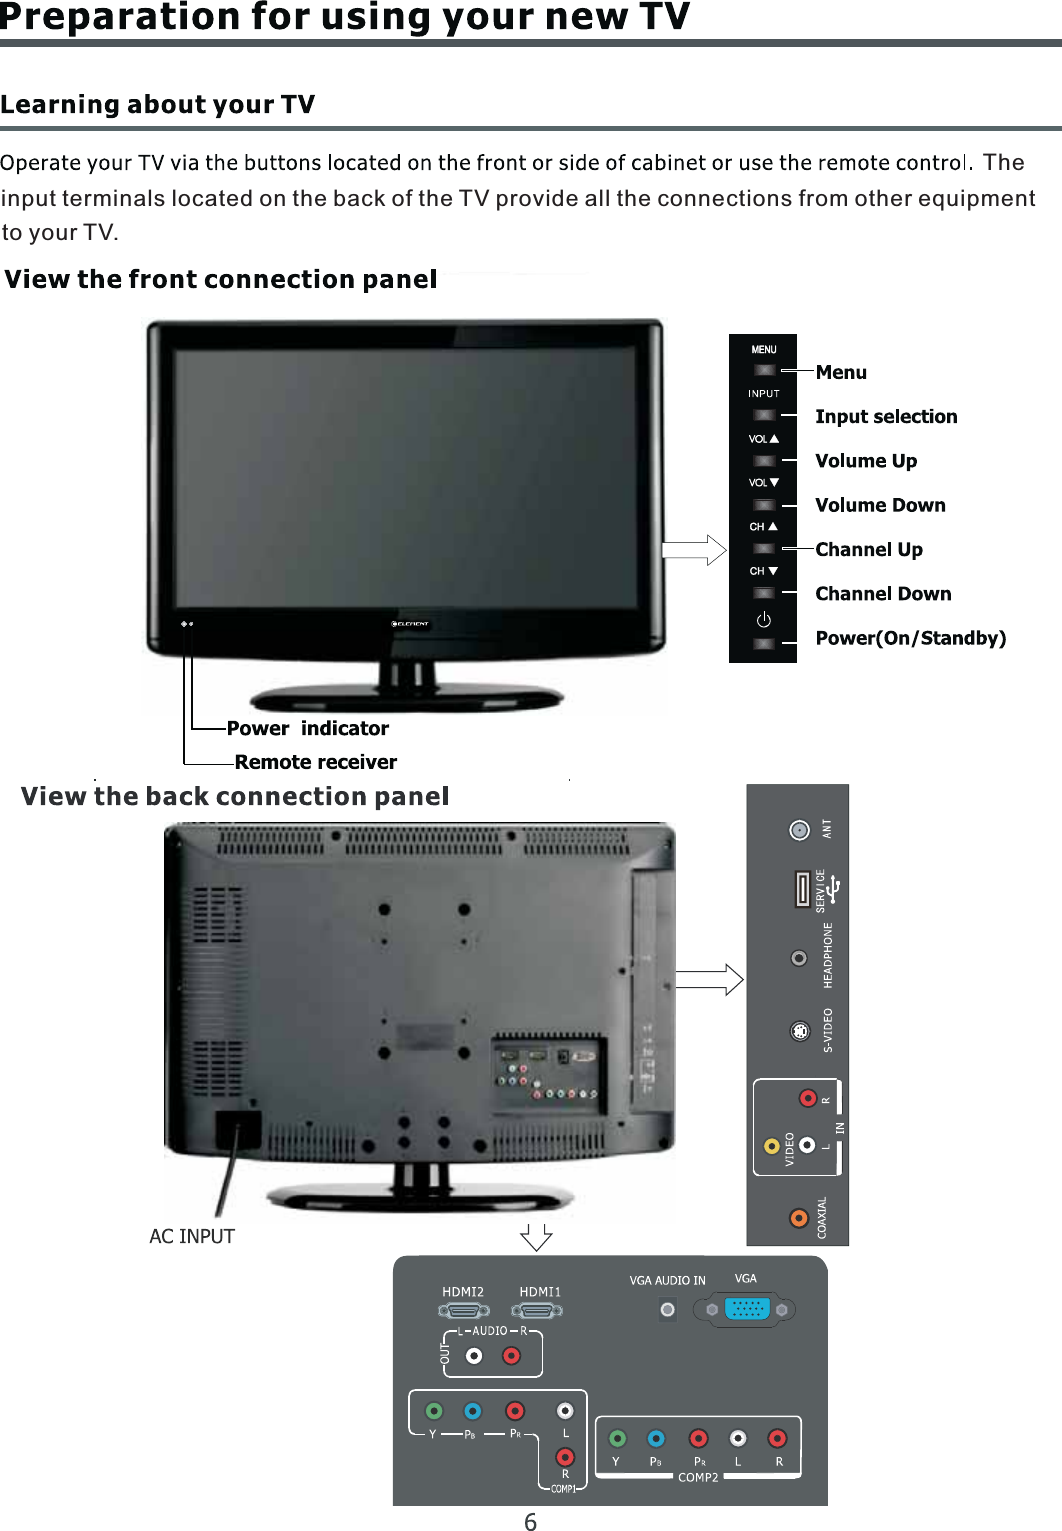        input terminals located on the back of the TV provide all the connections from other equipment The  to your TV.